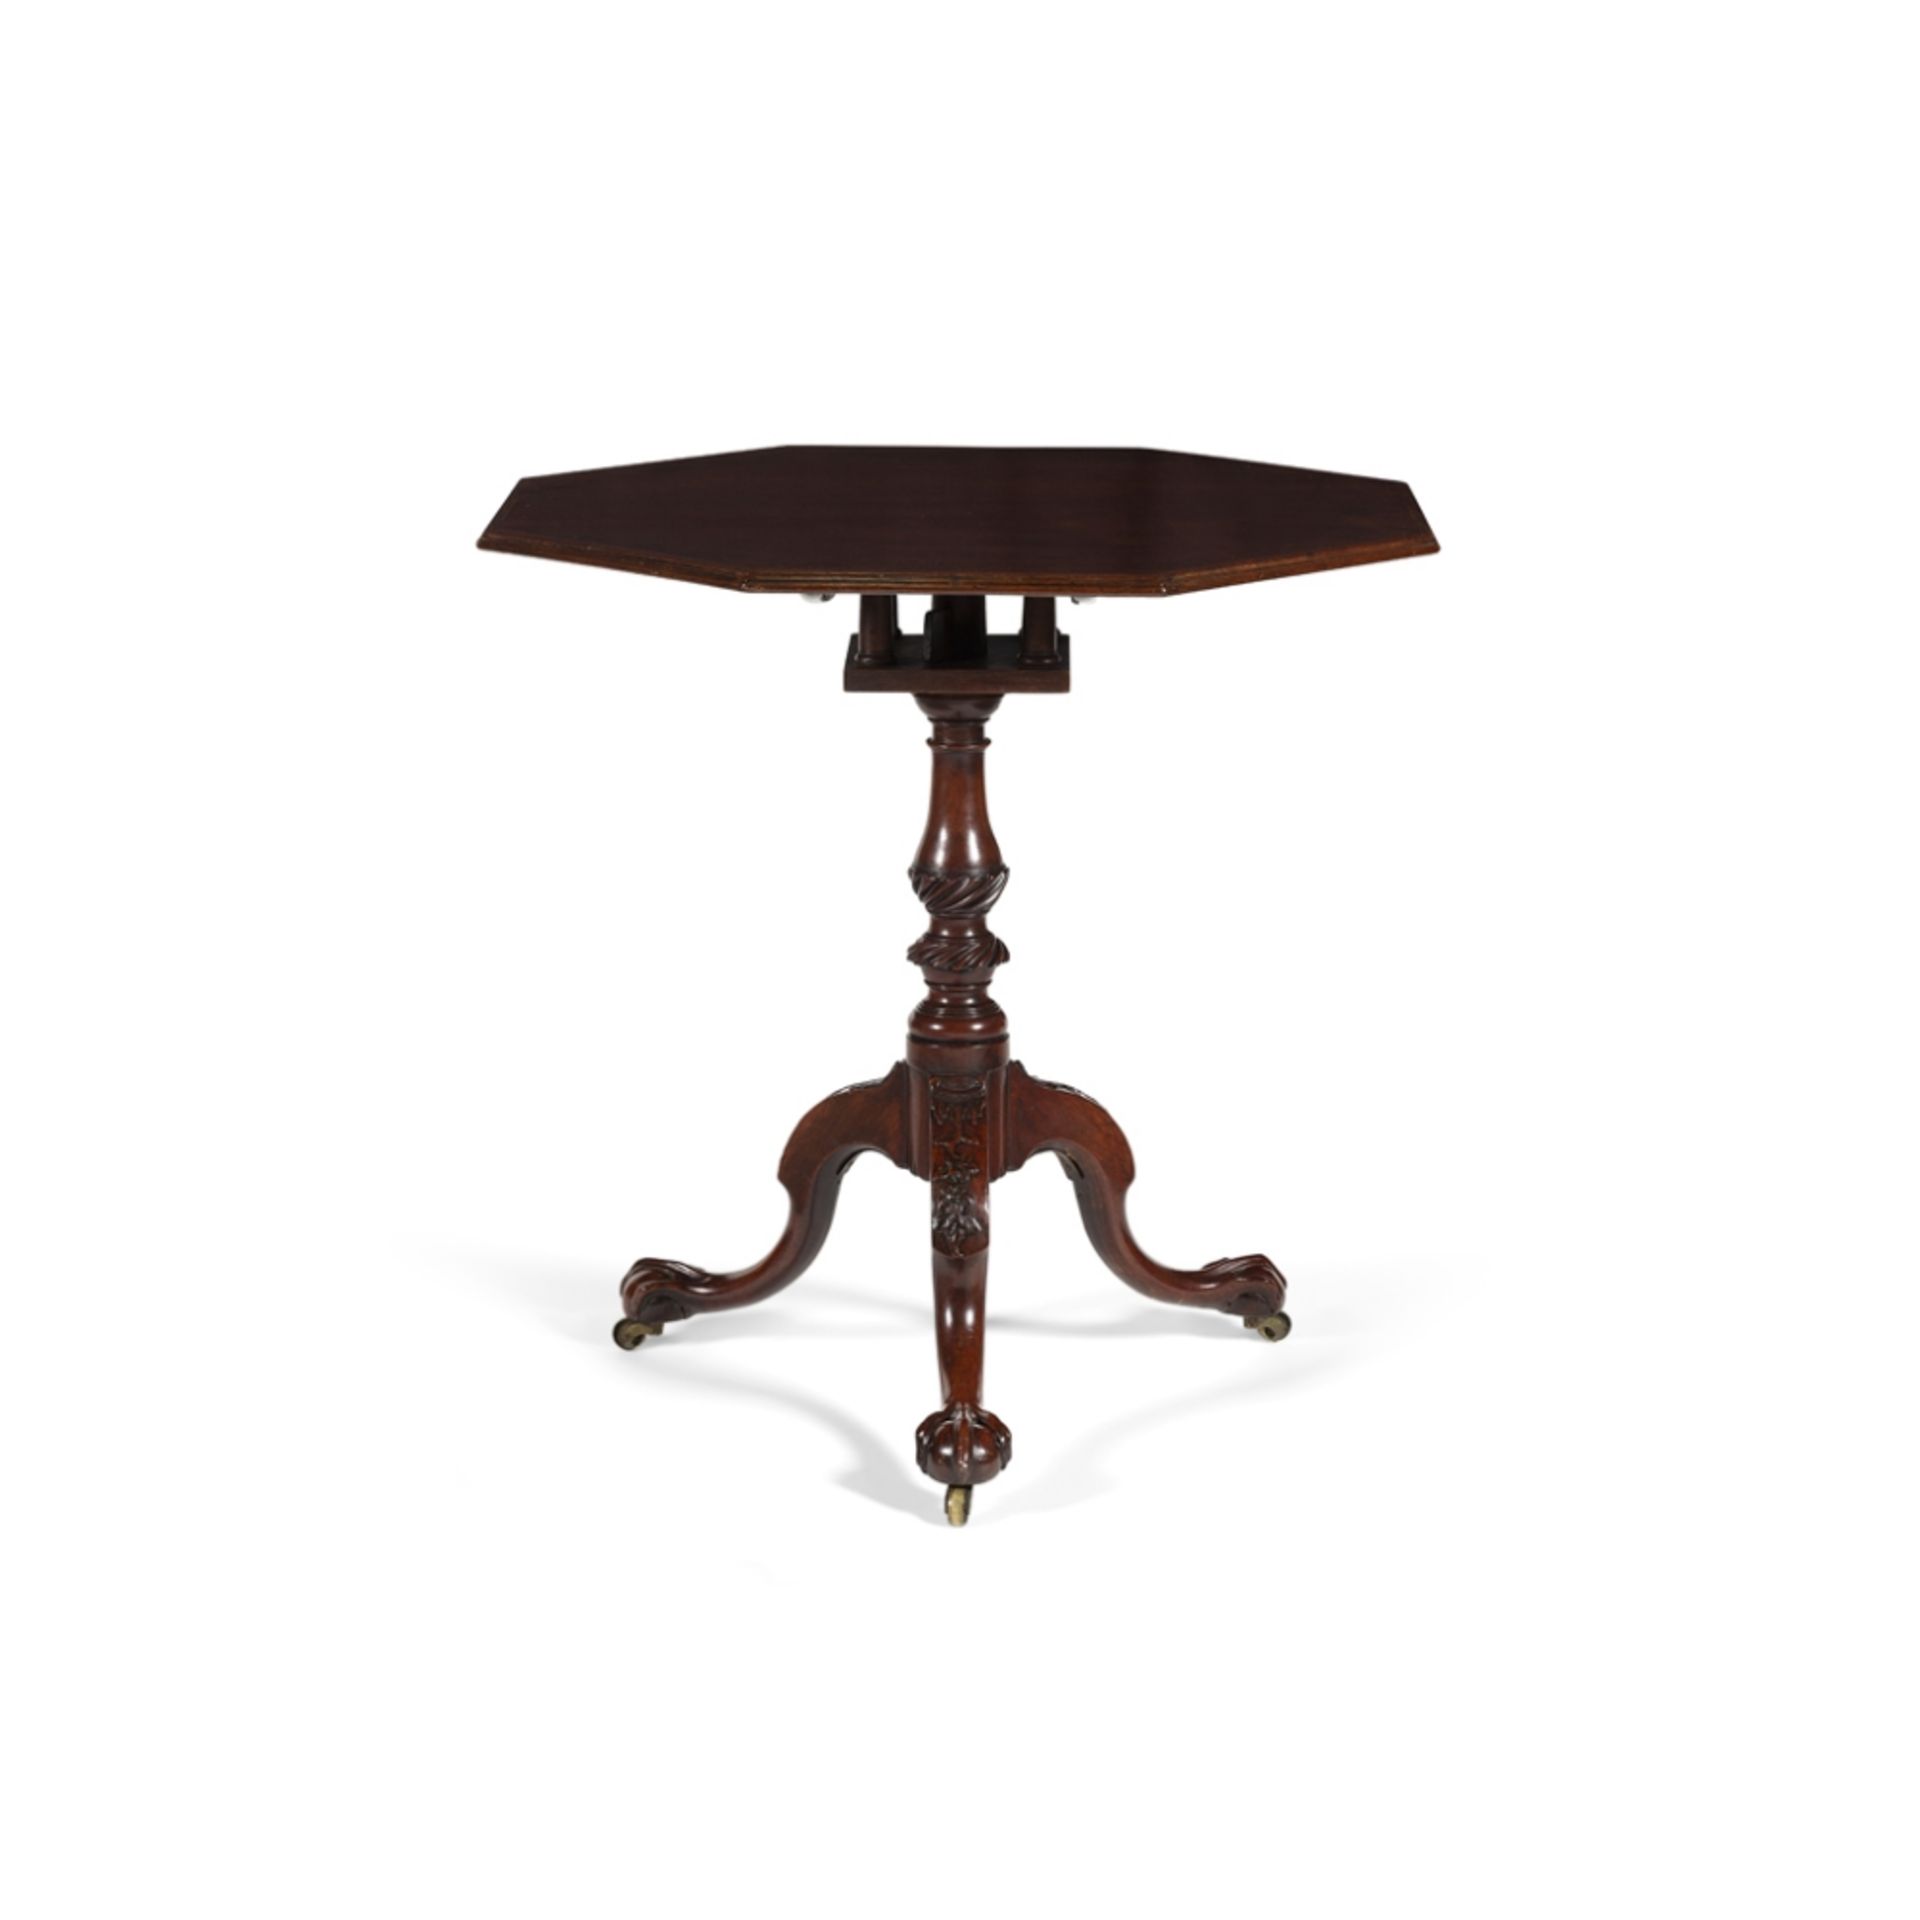 GEORGE III MAHOGANY OCTAGONAL BIRDCAGE TRIPOD TABLE18TH CENTURY the octagonal top with a stringing